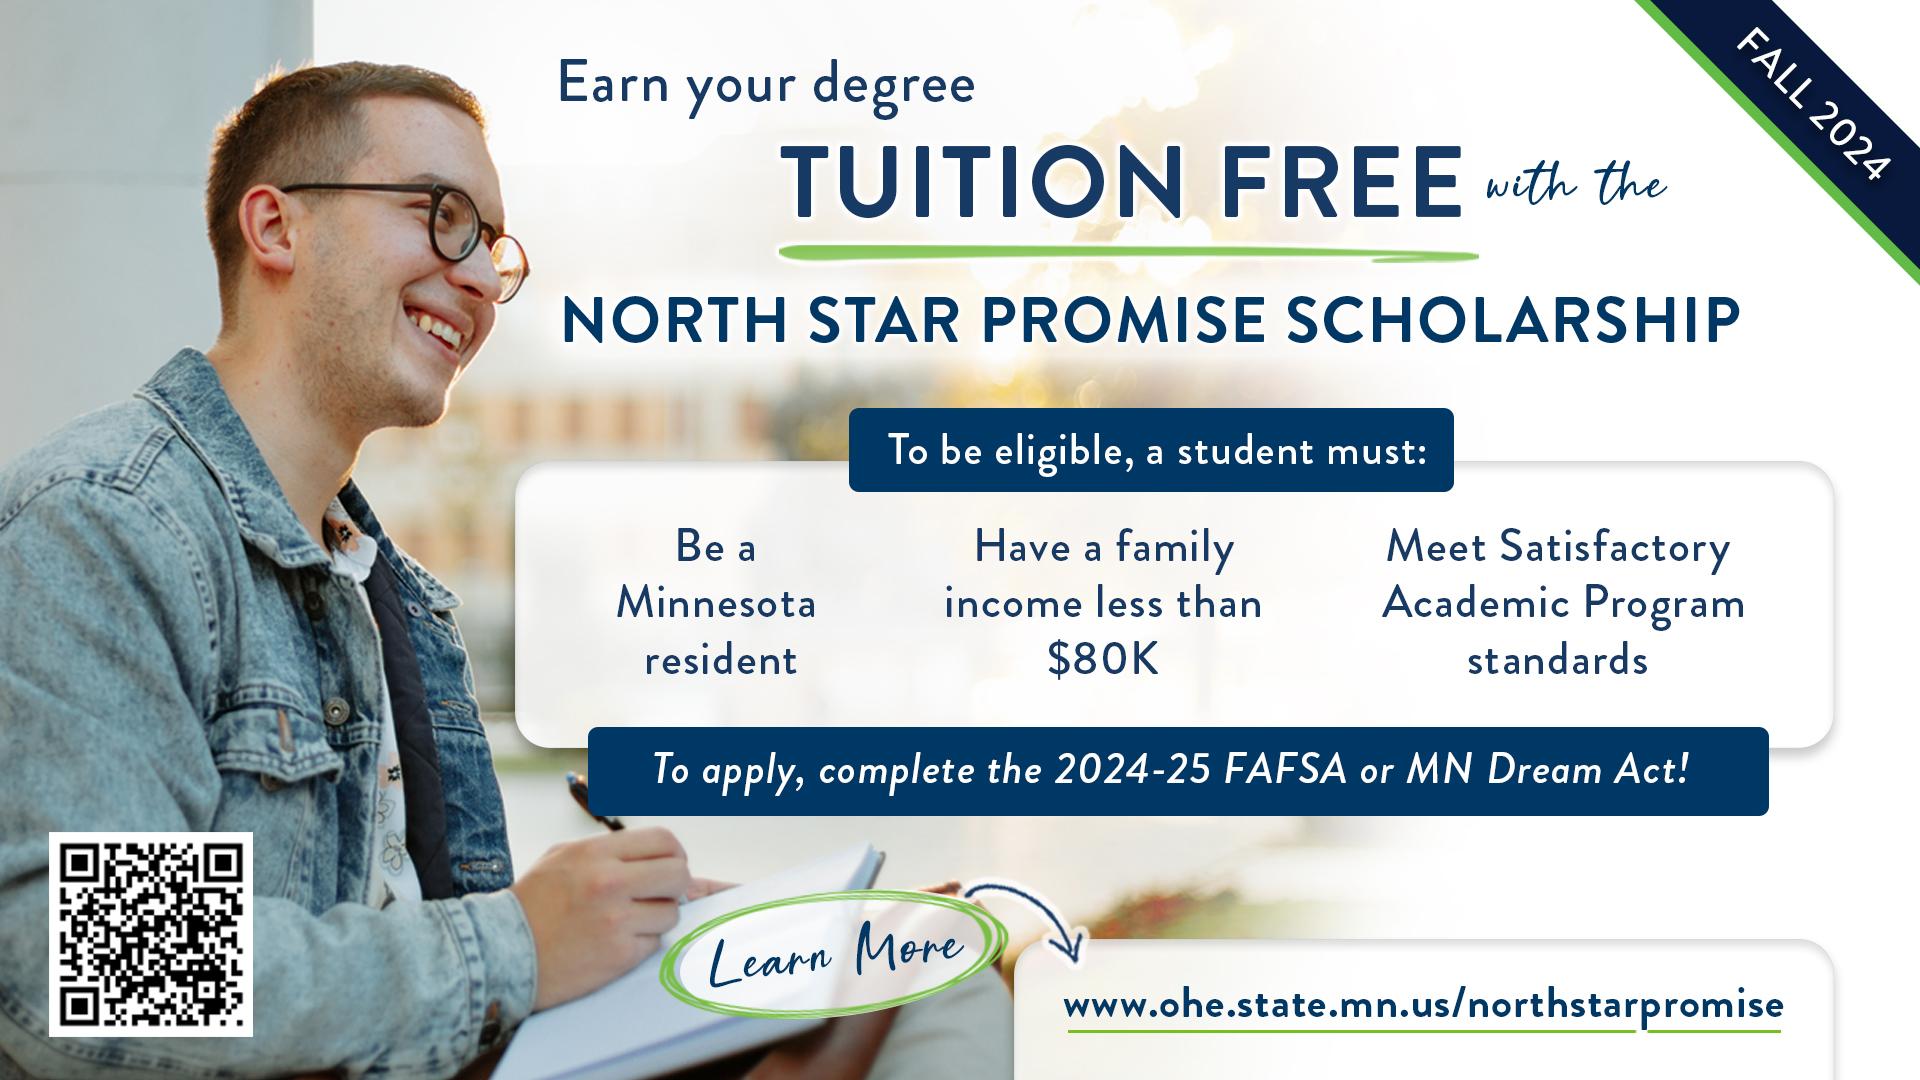 A graphic showing a student and the main details of the North Star Promise program.